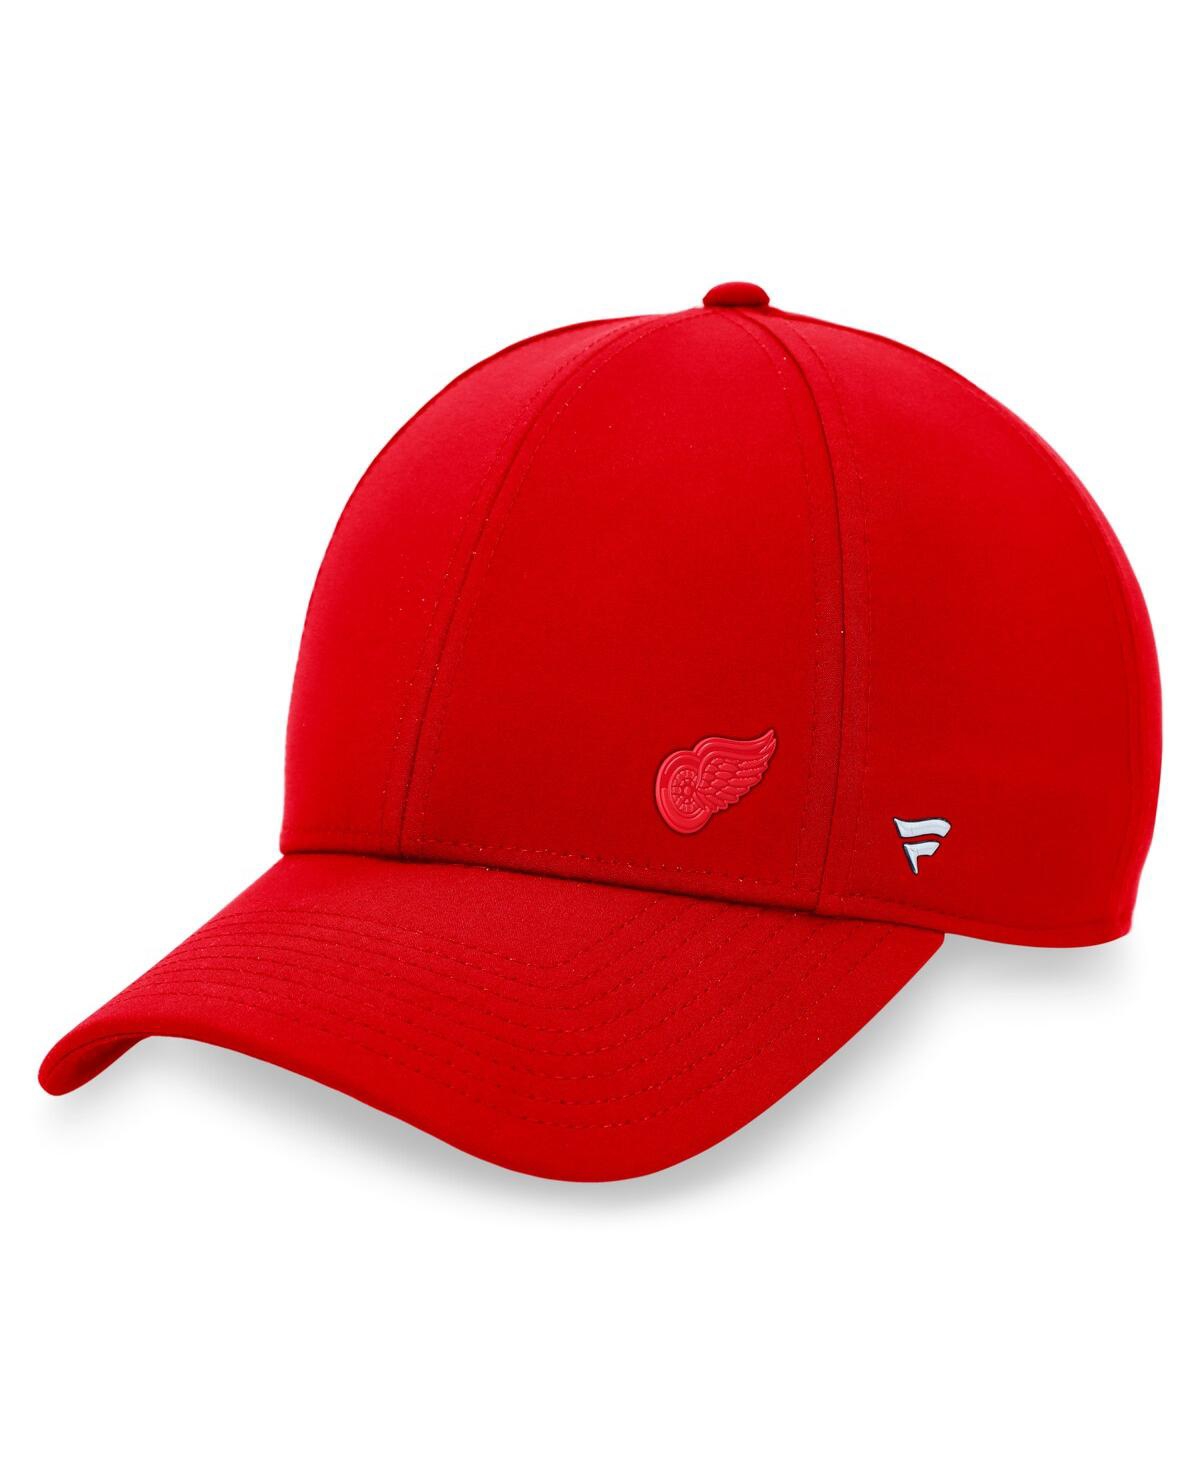 Shop Fanatics Women's  Red Detroit Red Wings Authentic Pro Road Structured Adjustable Hat